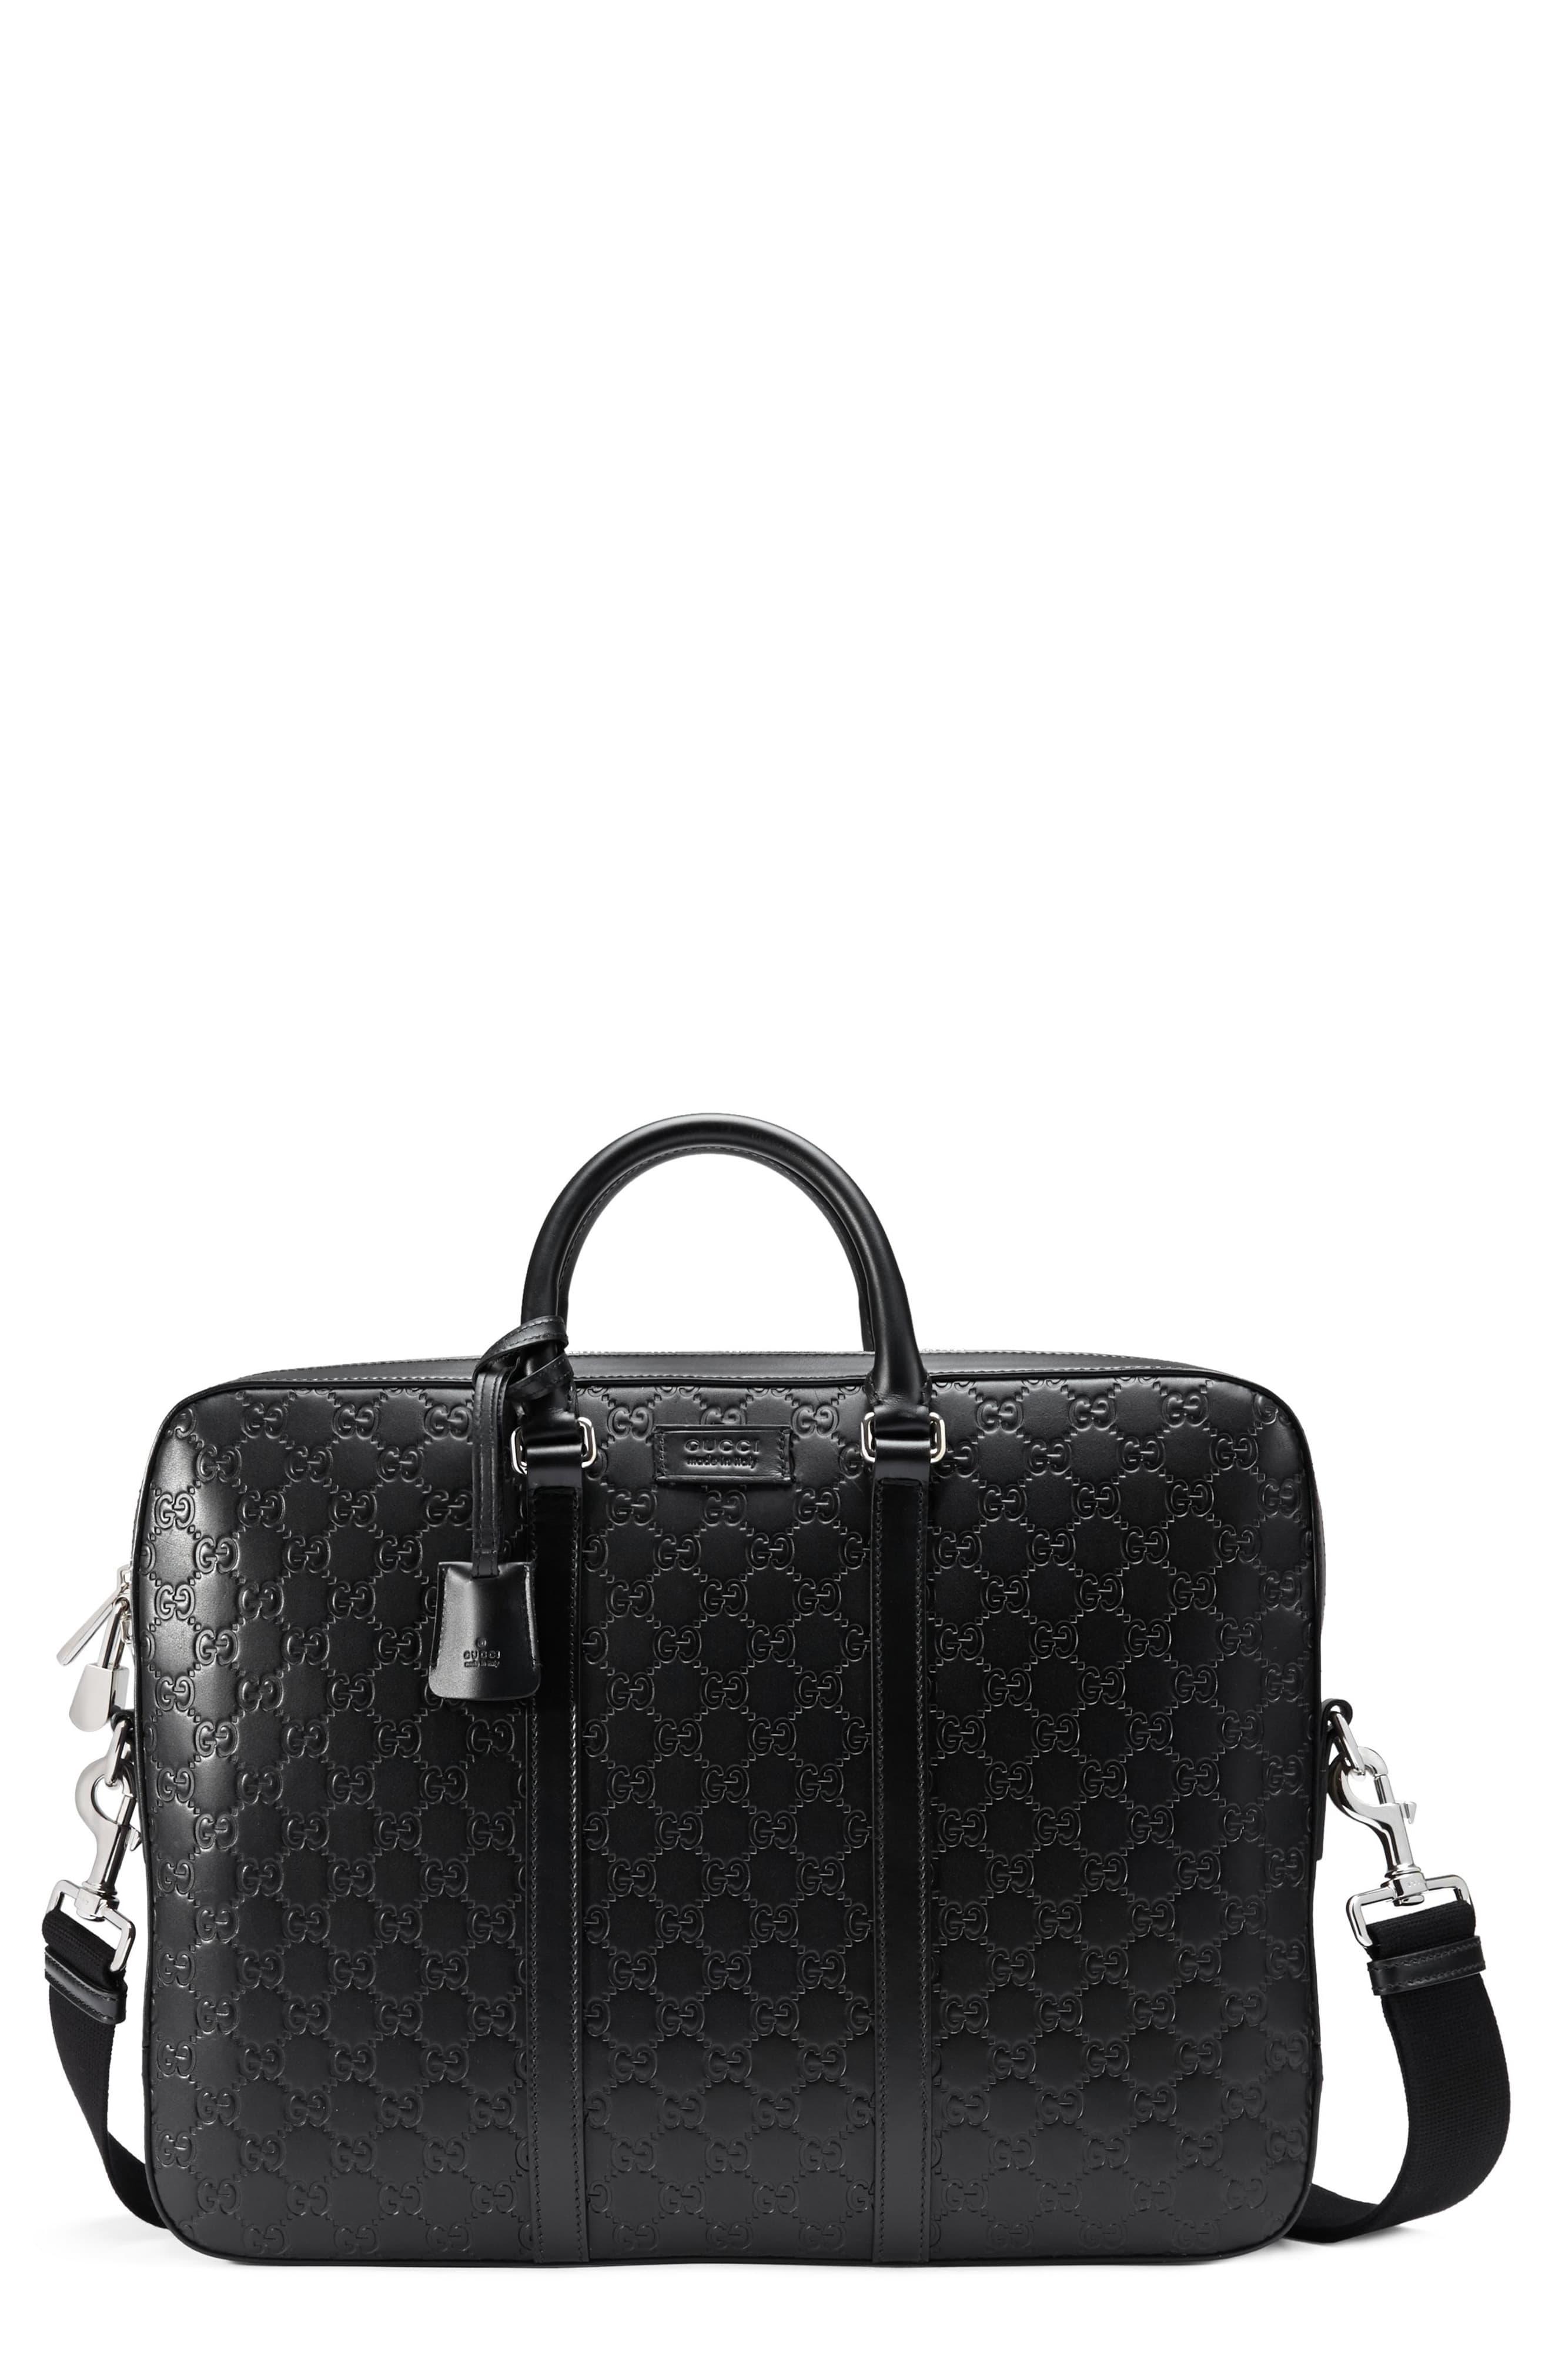 Gucci Signature Leather Briefcase in Black for Men - Lyst